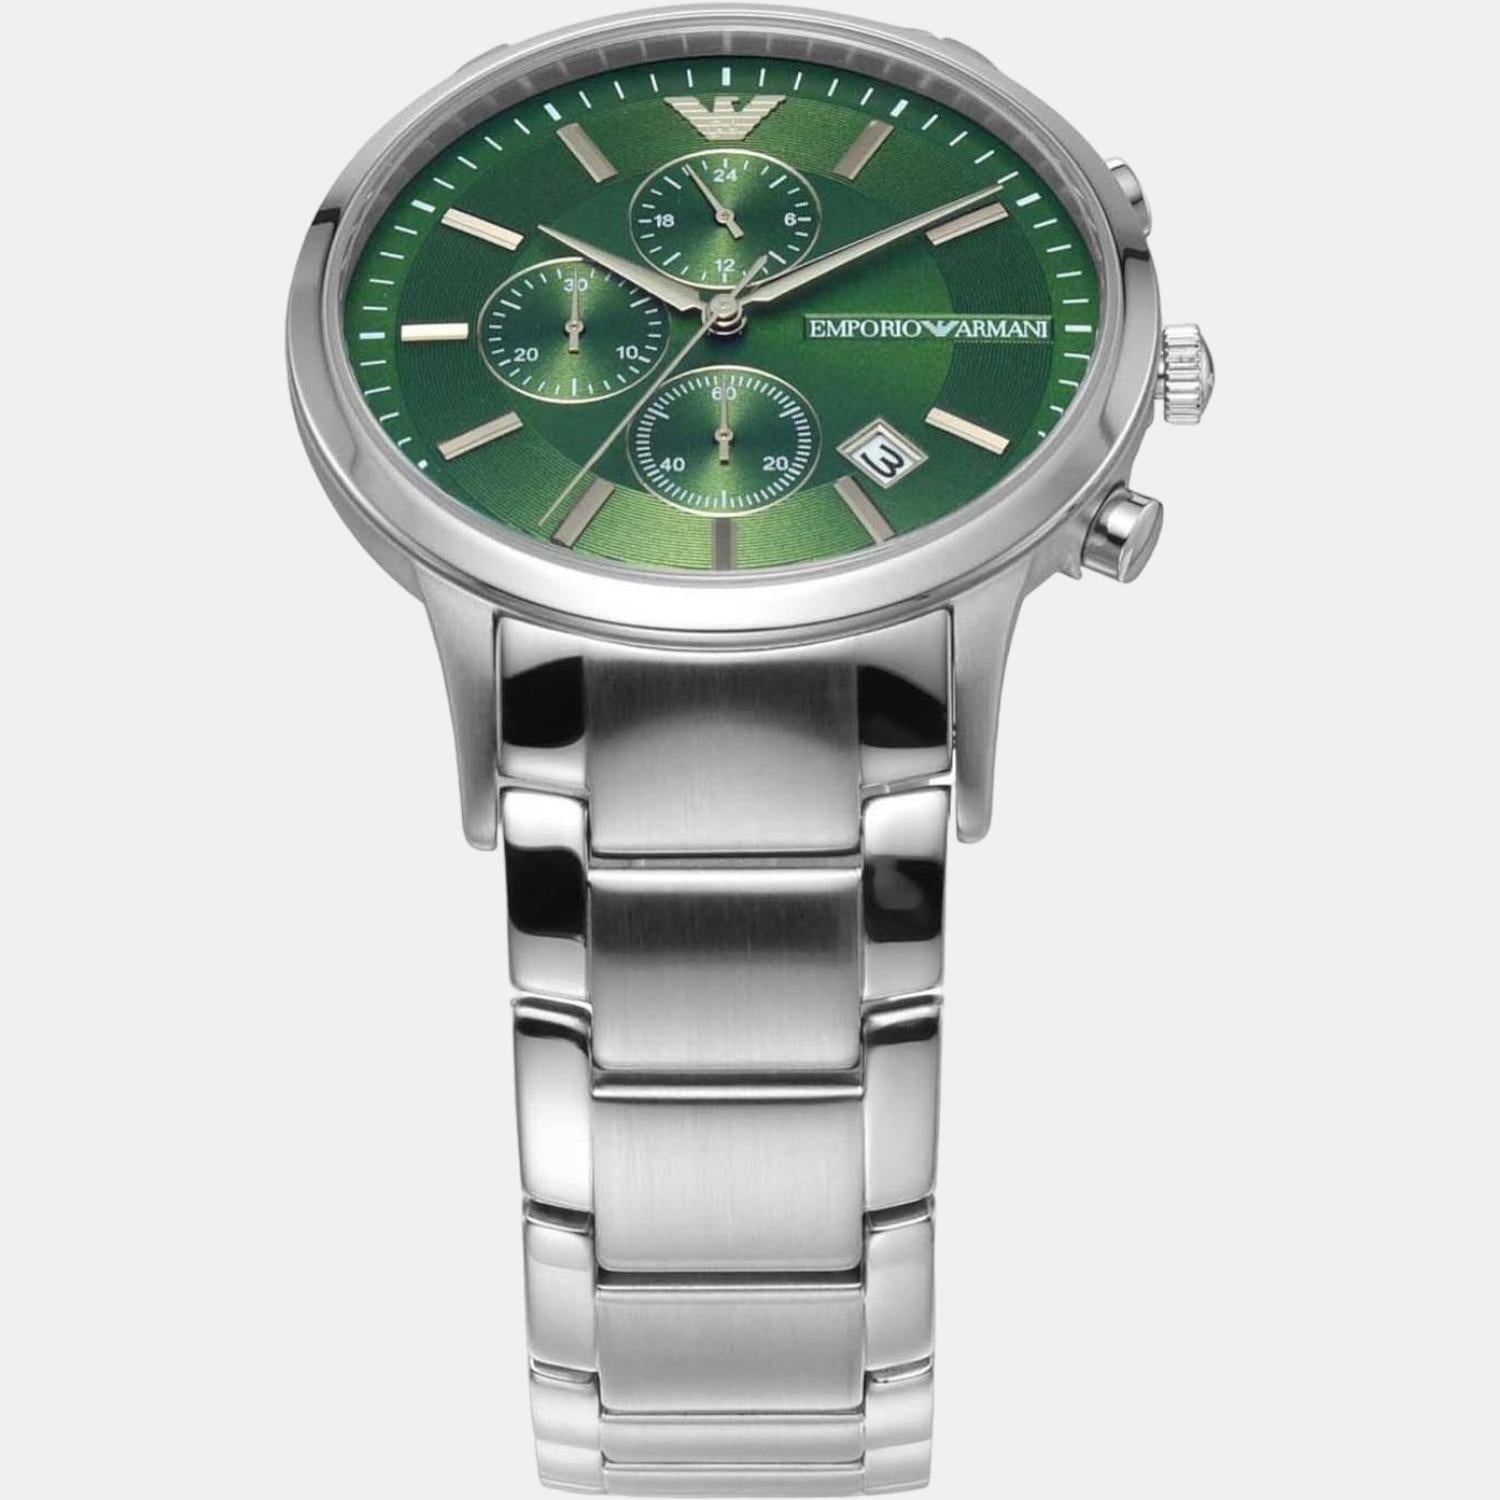 Stainless Steel | Just Time Armani Armani Emporio Green In Chronograph Emporio – Watch Male Quartz